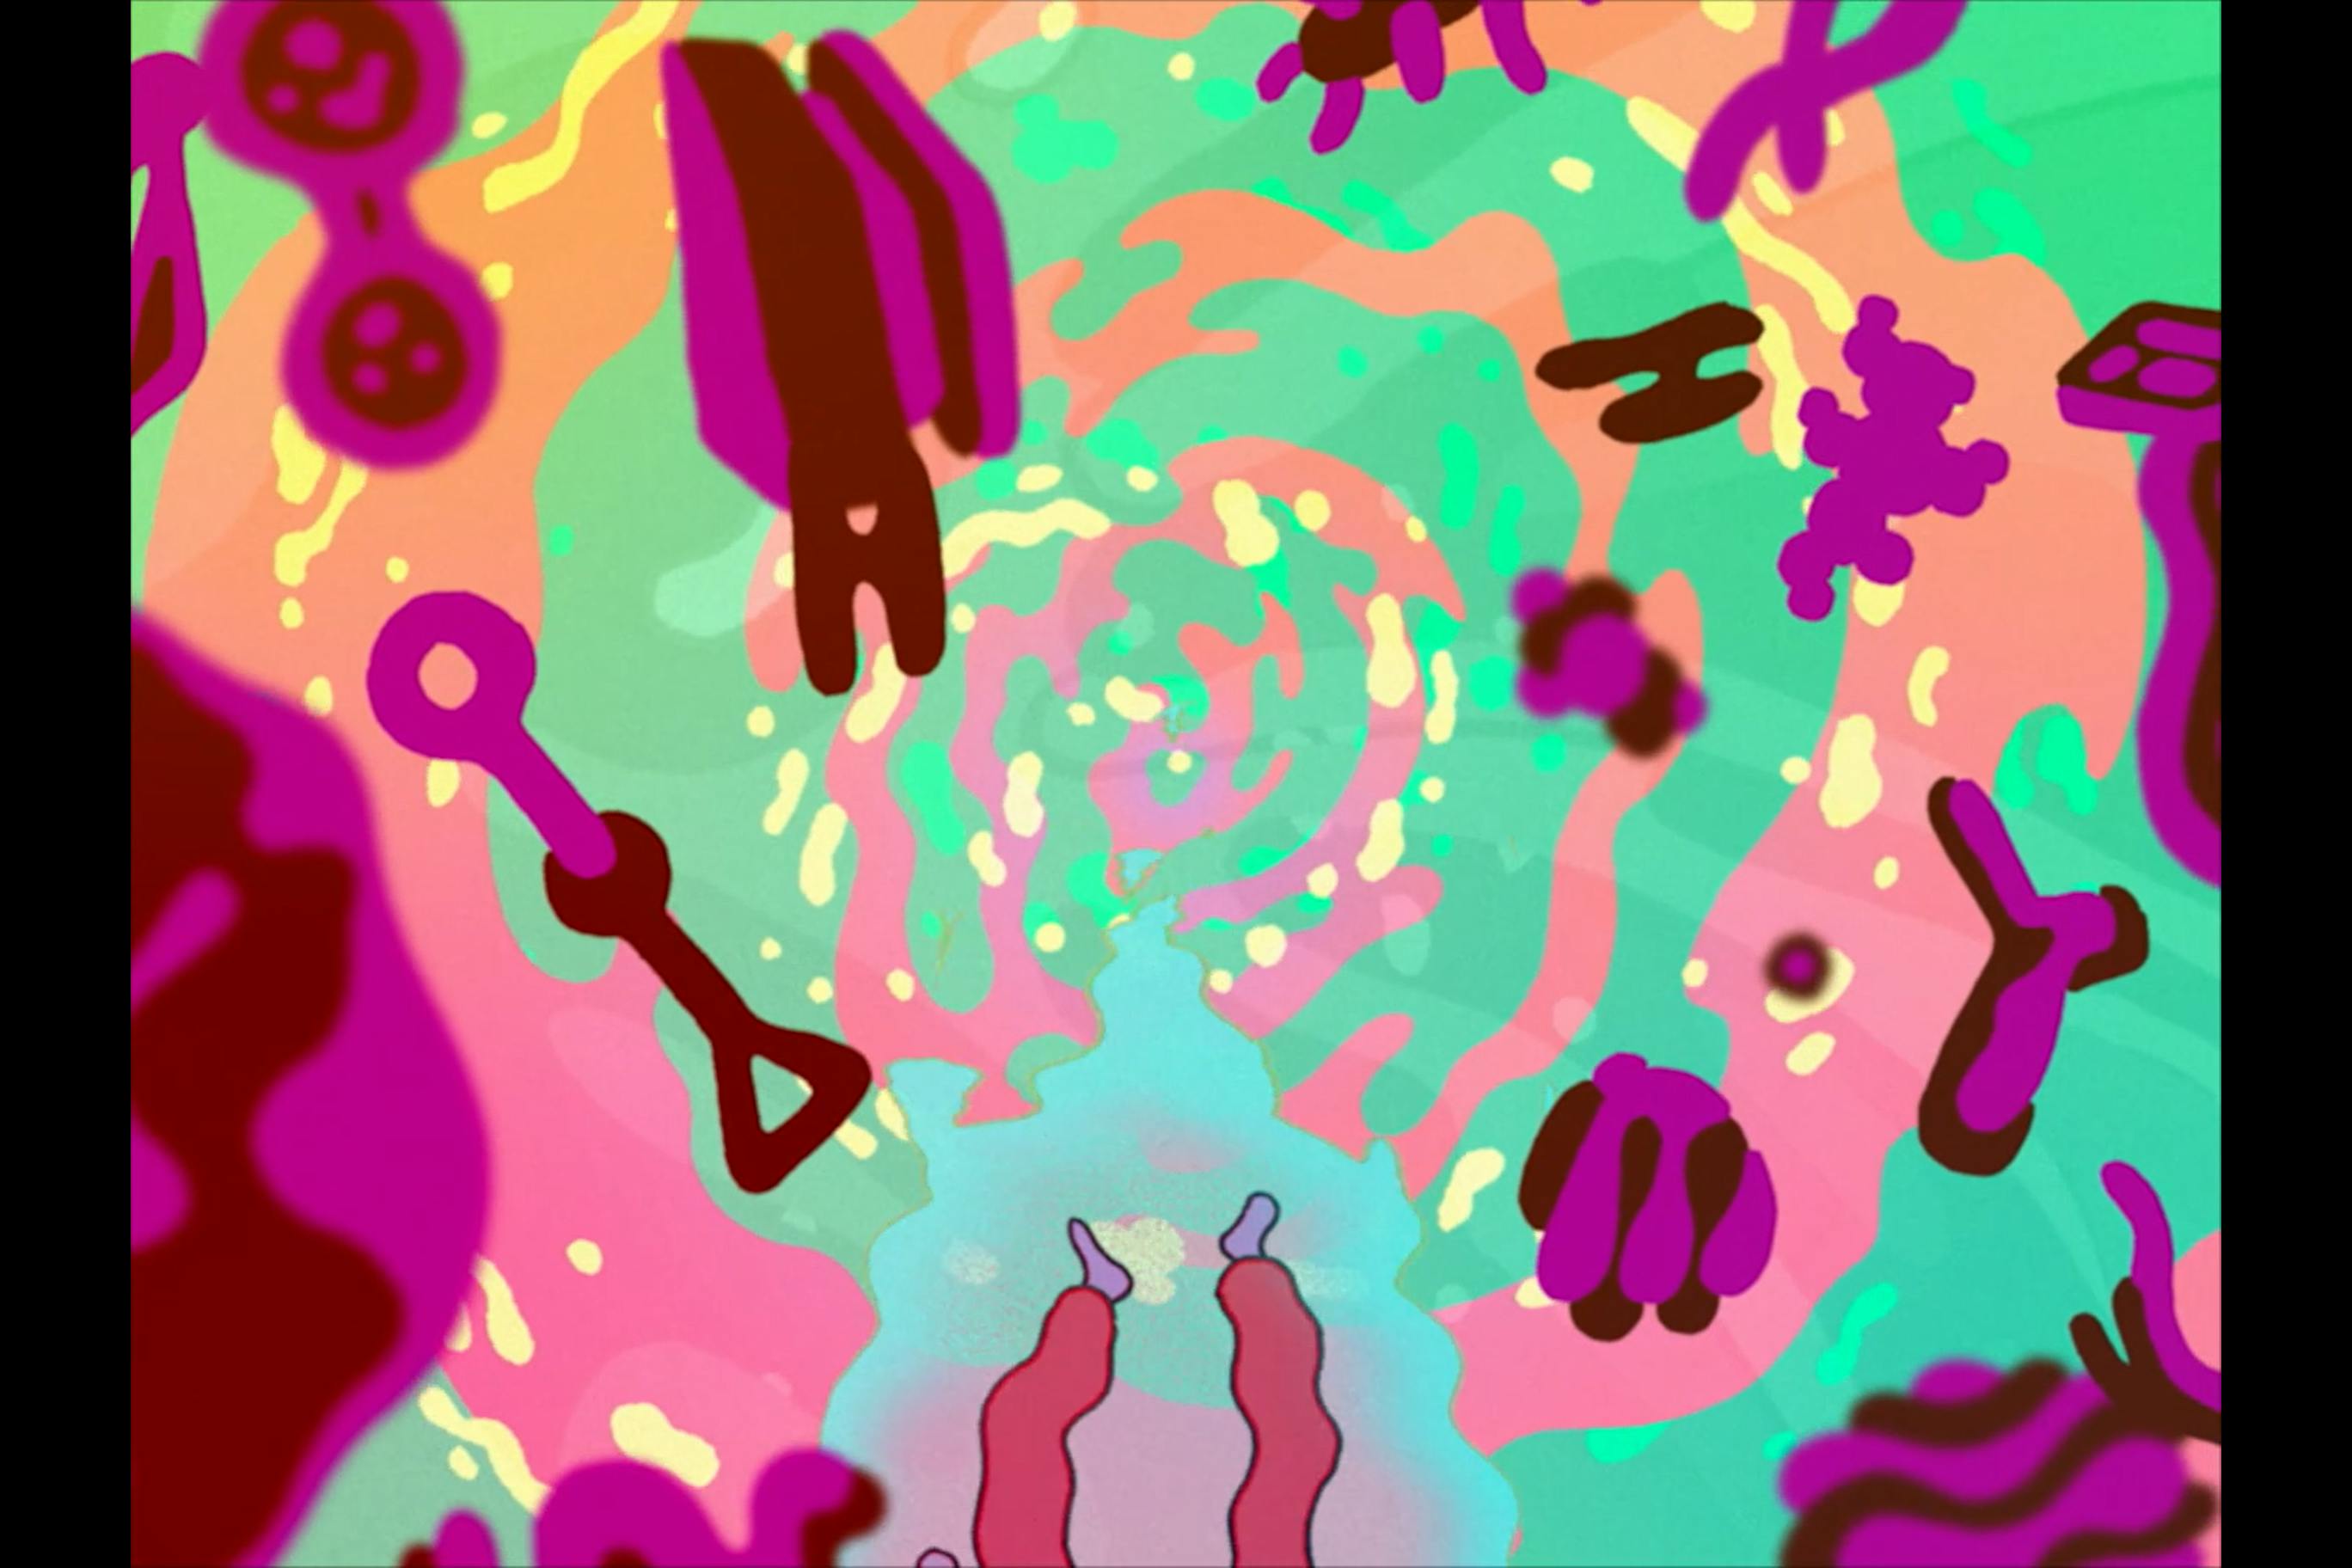 a POV shot of character looking into a portal. Th eportal is made up of colourful blobs of neon green, pastel yellow and a light salmon-pink. Intermingled in the portal are shapes made up of bright and dark pink blobs with vaguely tool-looking shapes. At the bottom of the frame you see the character's feet as they plummet into the portal. 